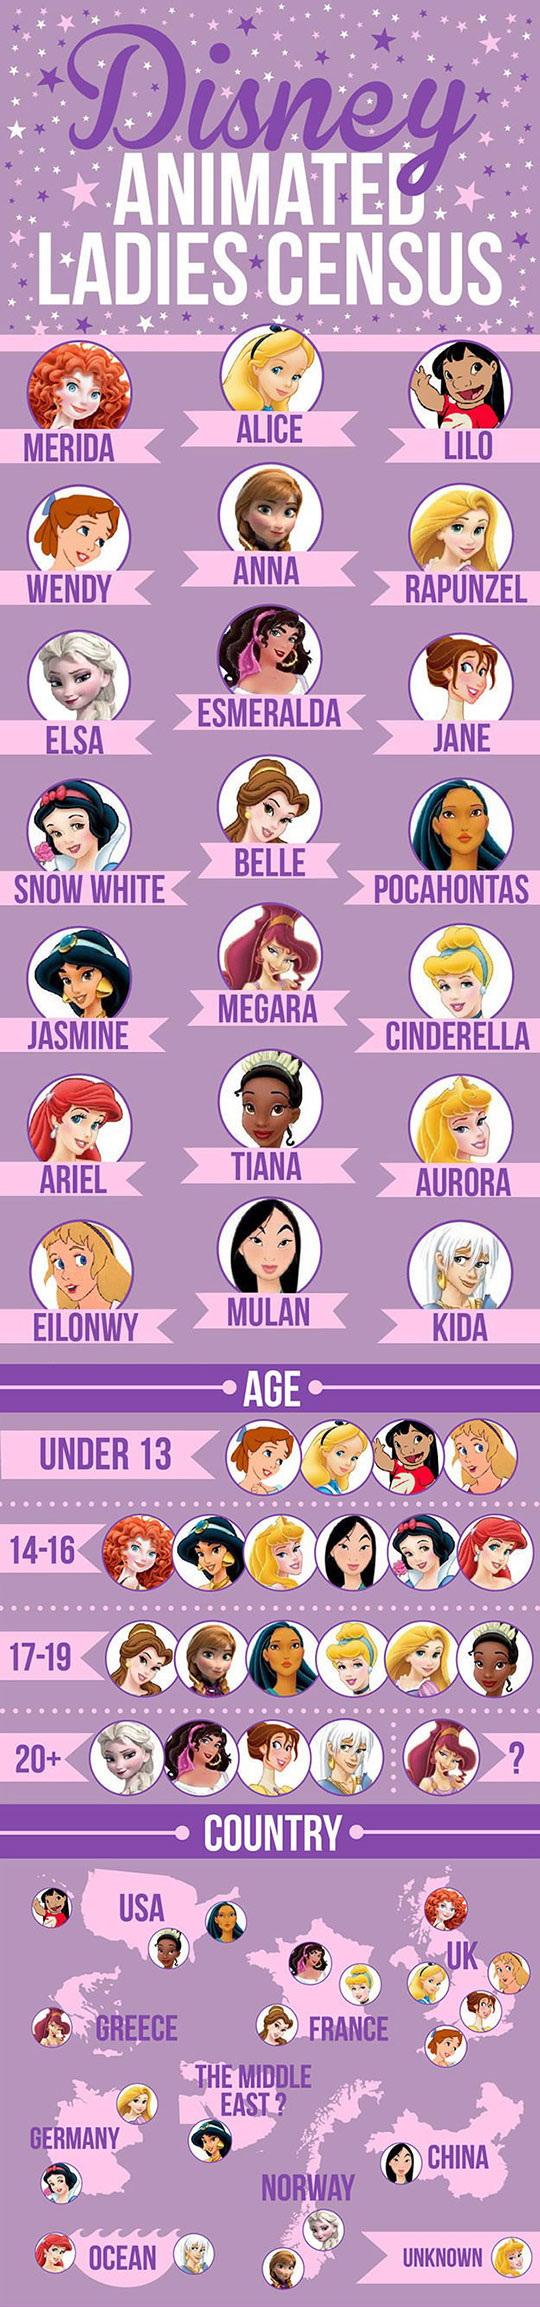 We Did An In-Depth Analysis Of 21 Disney Female Leads